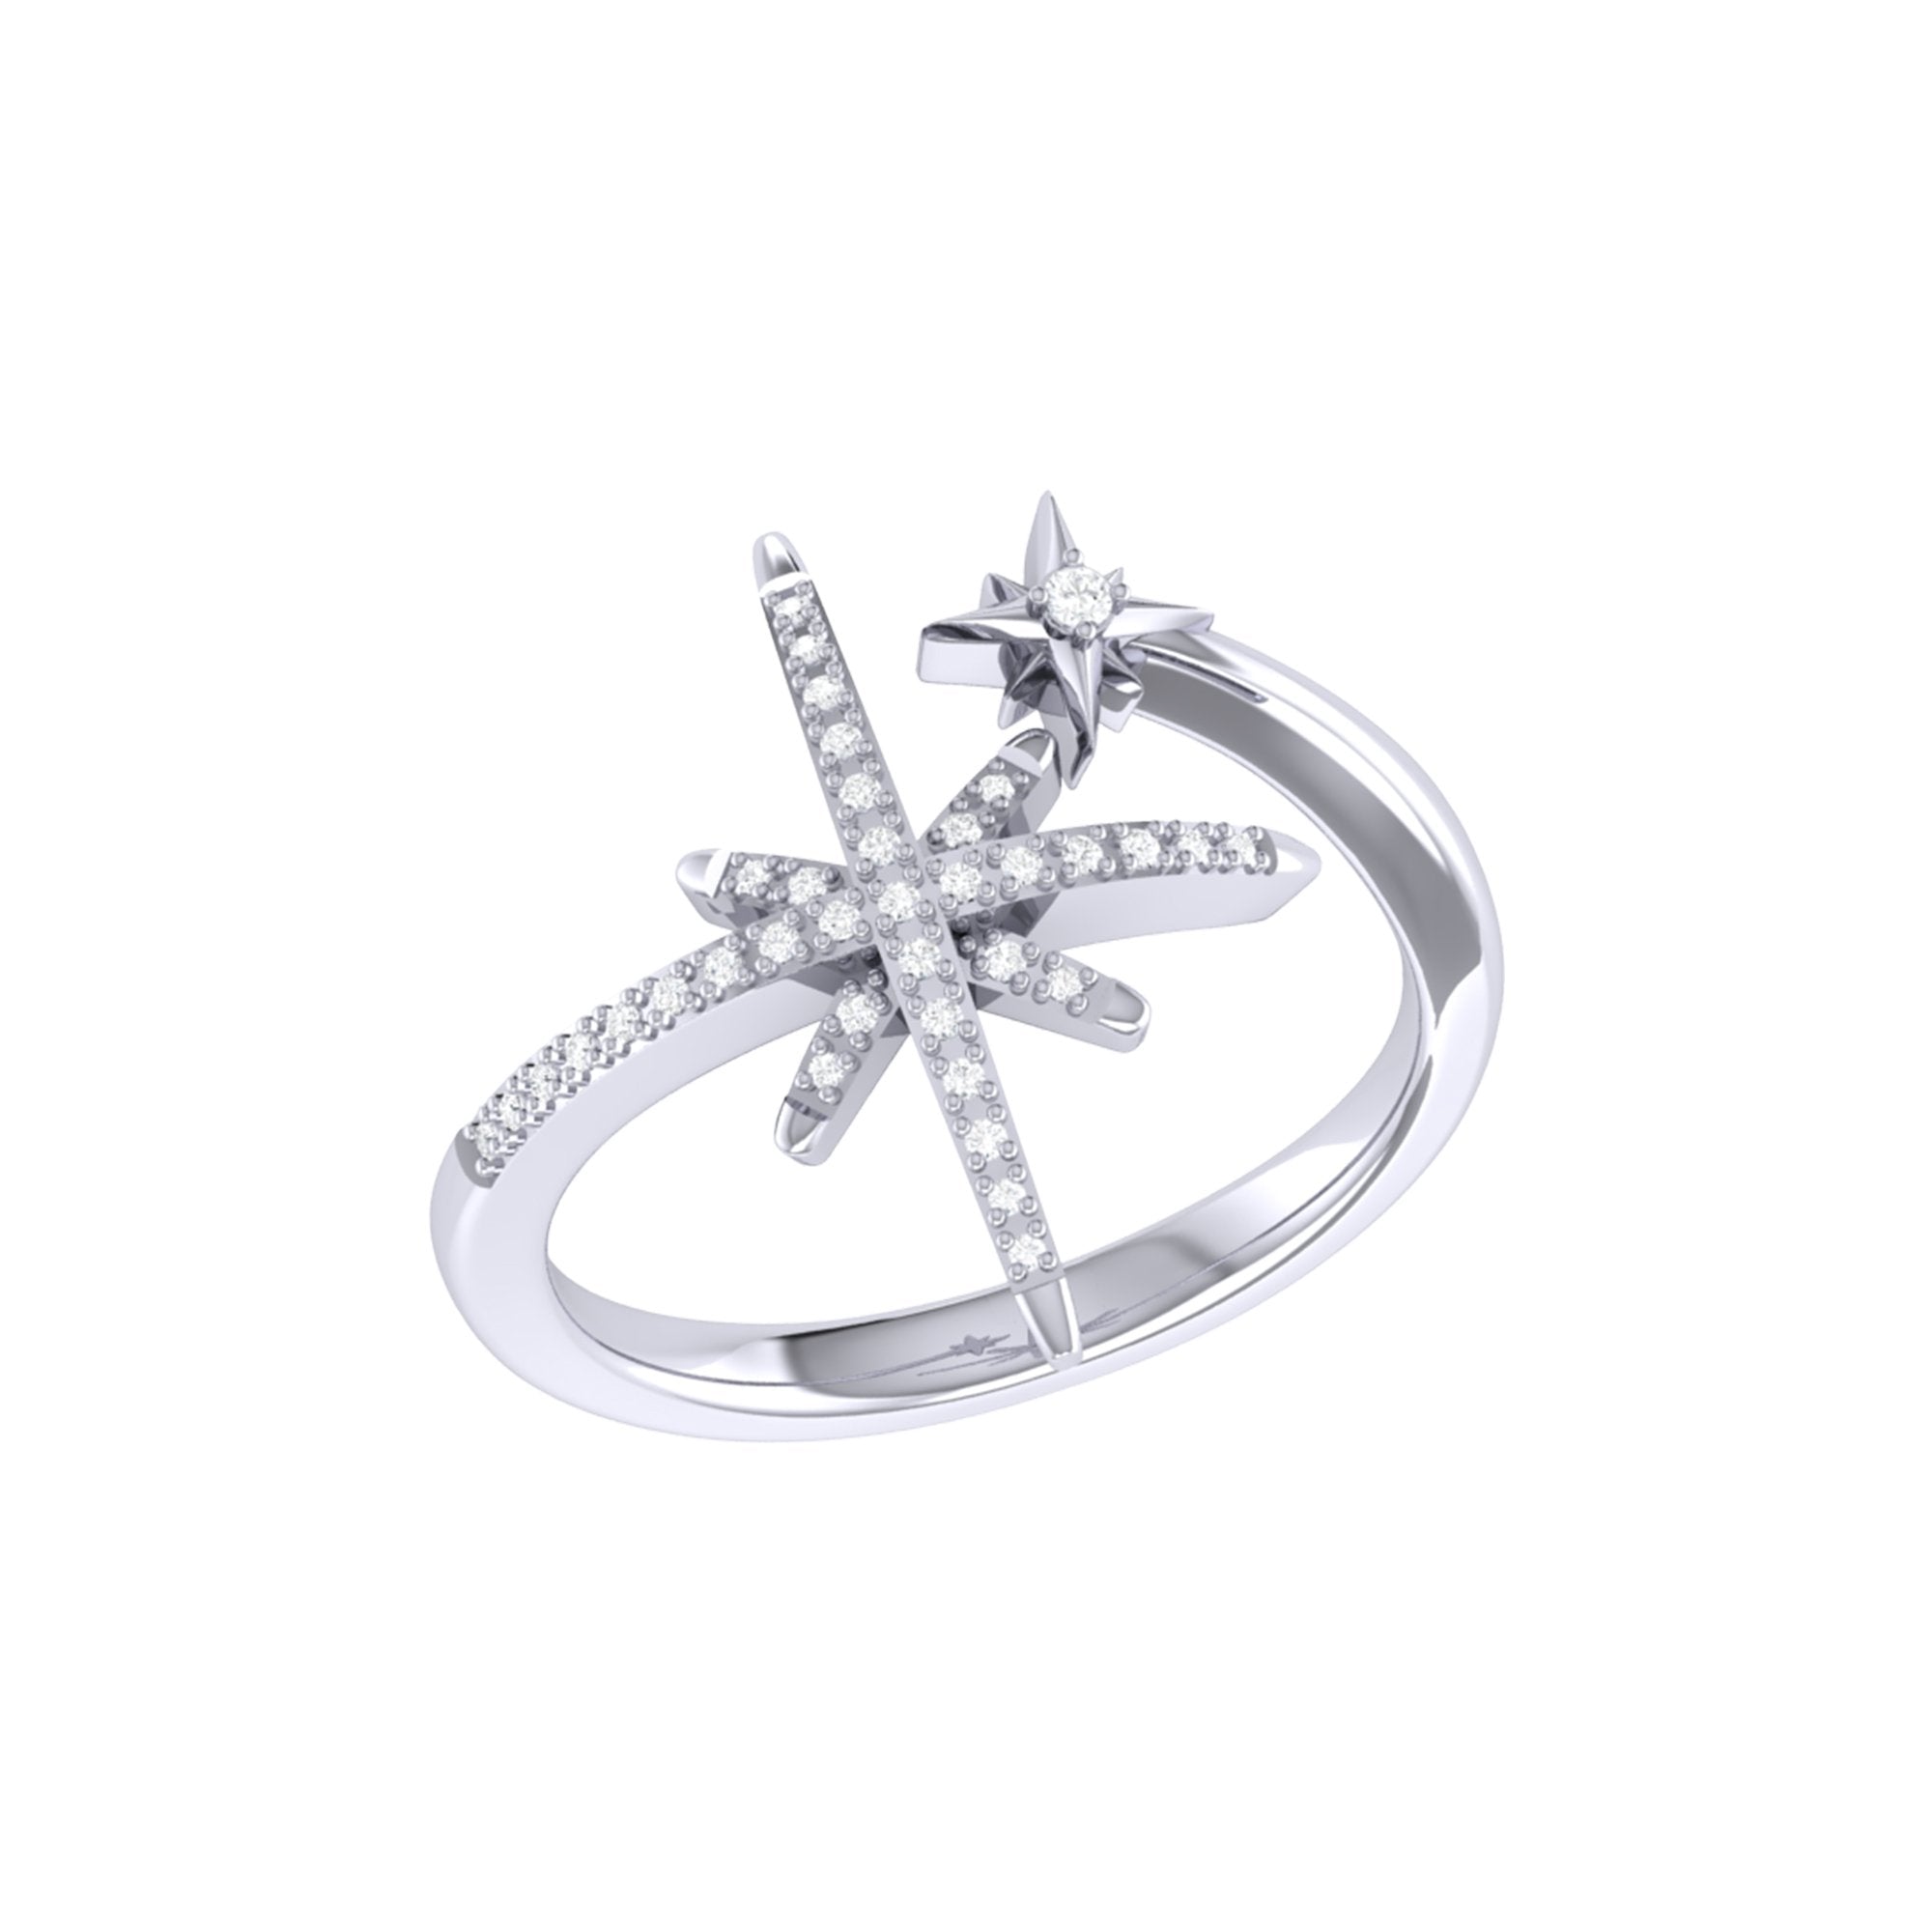 North Star Duo Diamond Ring in 14K White Gold